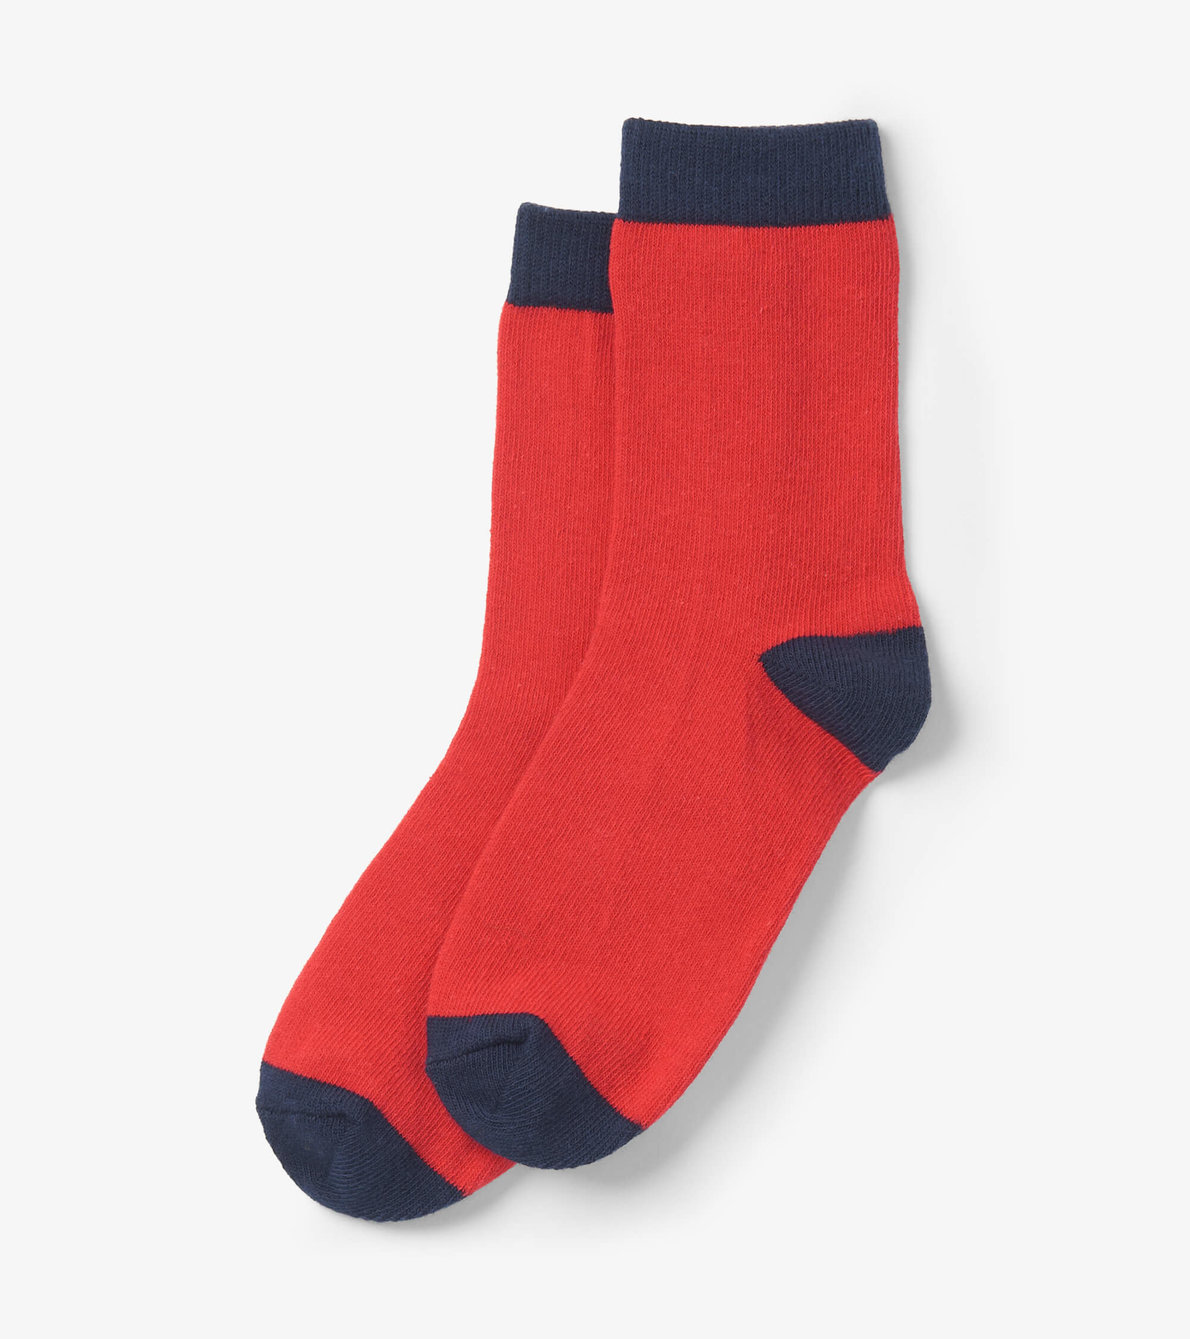 View larger image of Kids Red & Navy Crew Socks